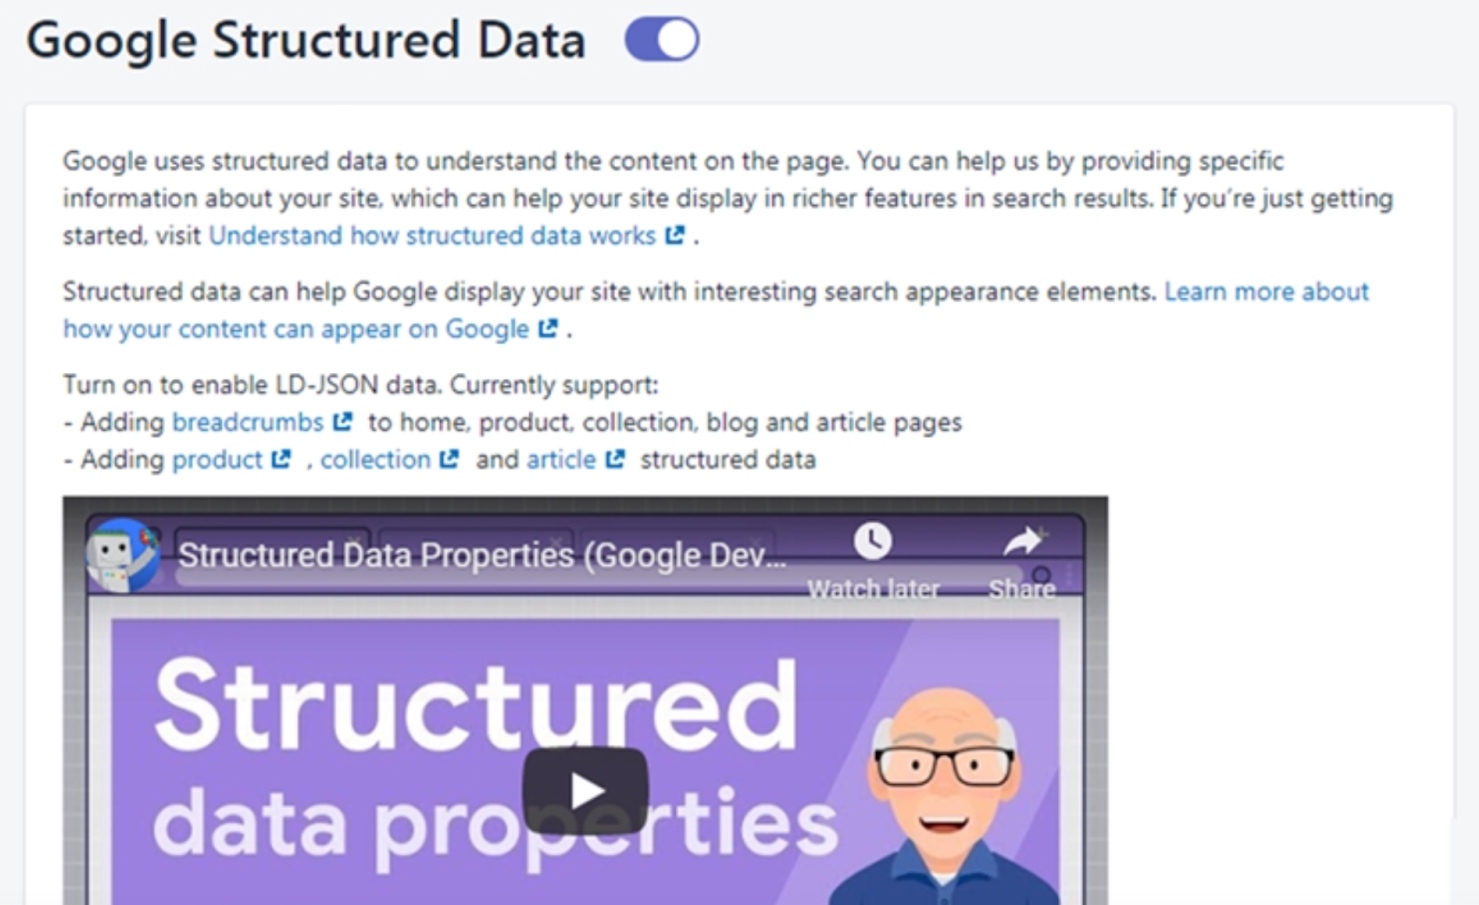 "Google Structured Data" enabled in SEO Image Optimizer tool